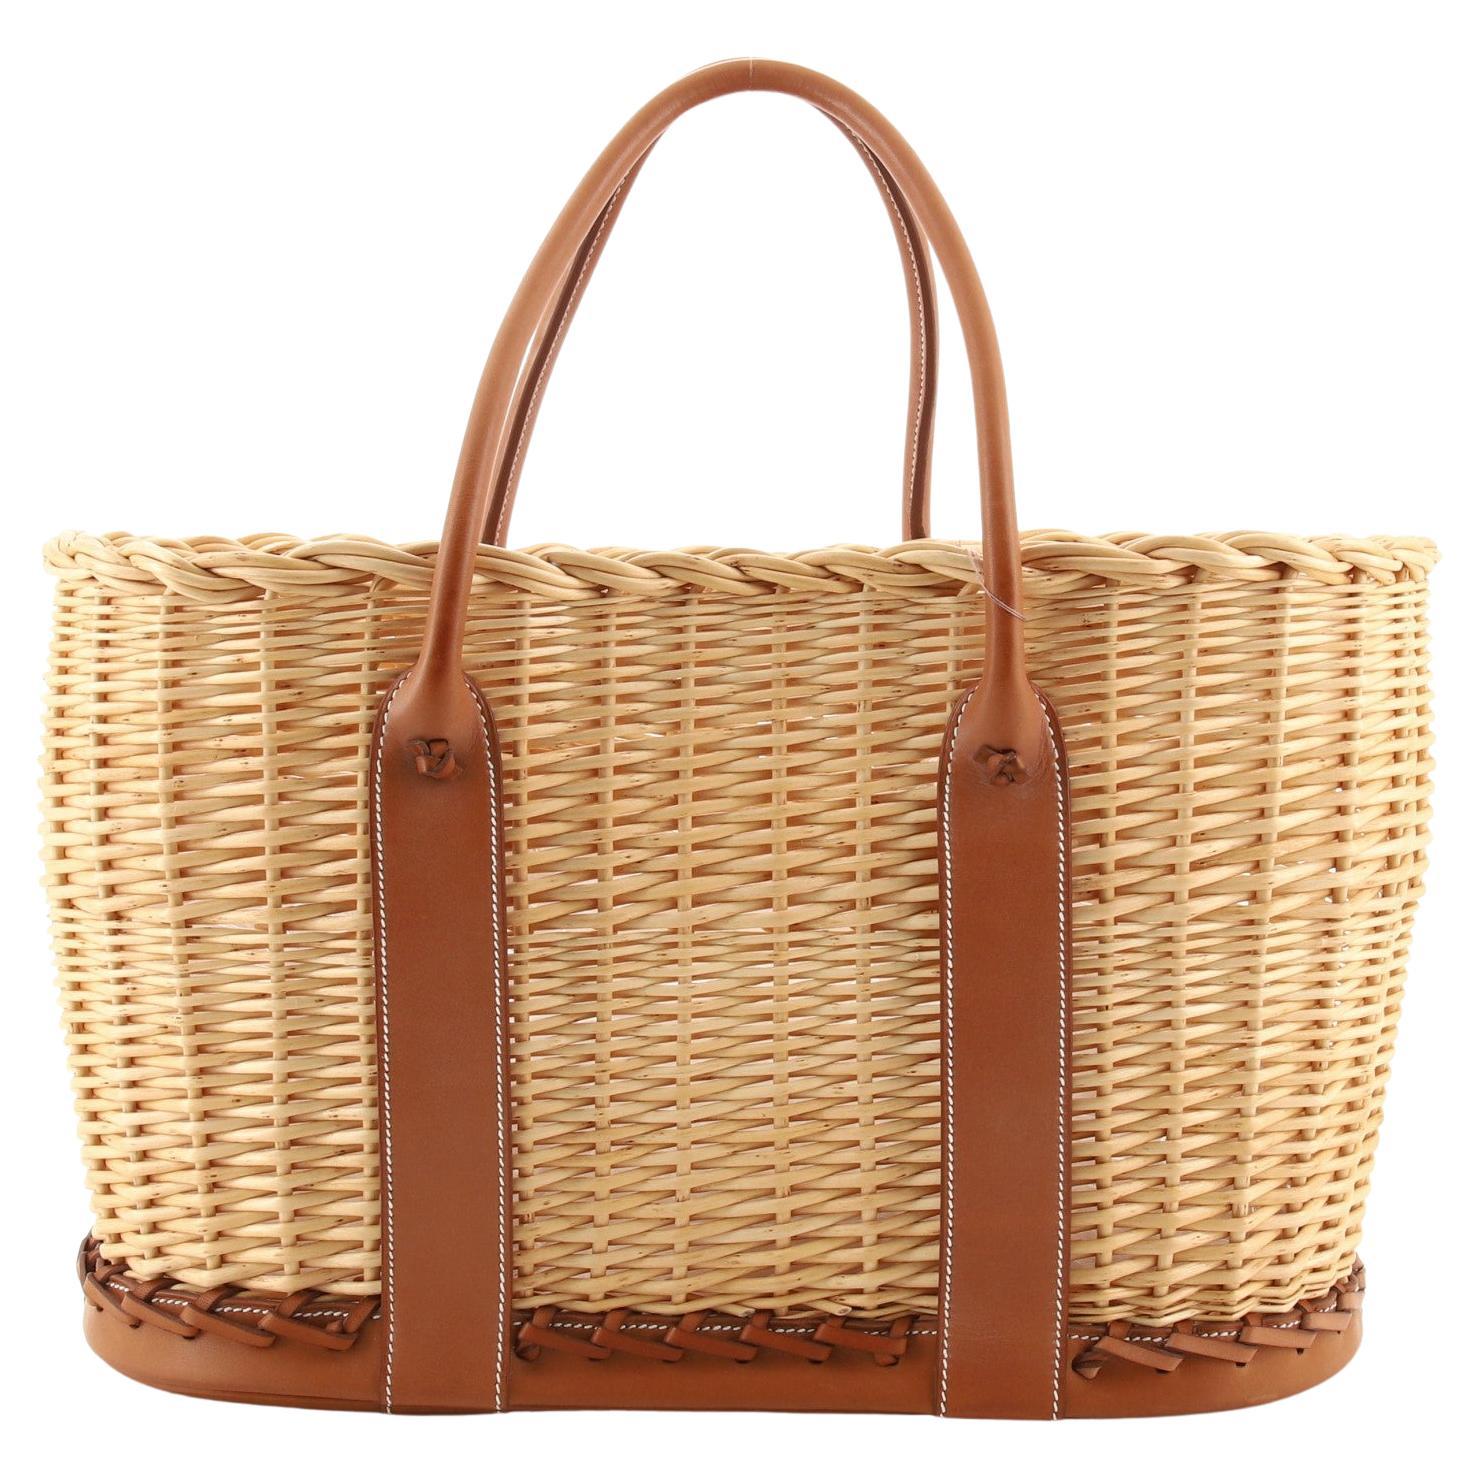 Hermes Picnic Garden Party Tote Wicker and Leather